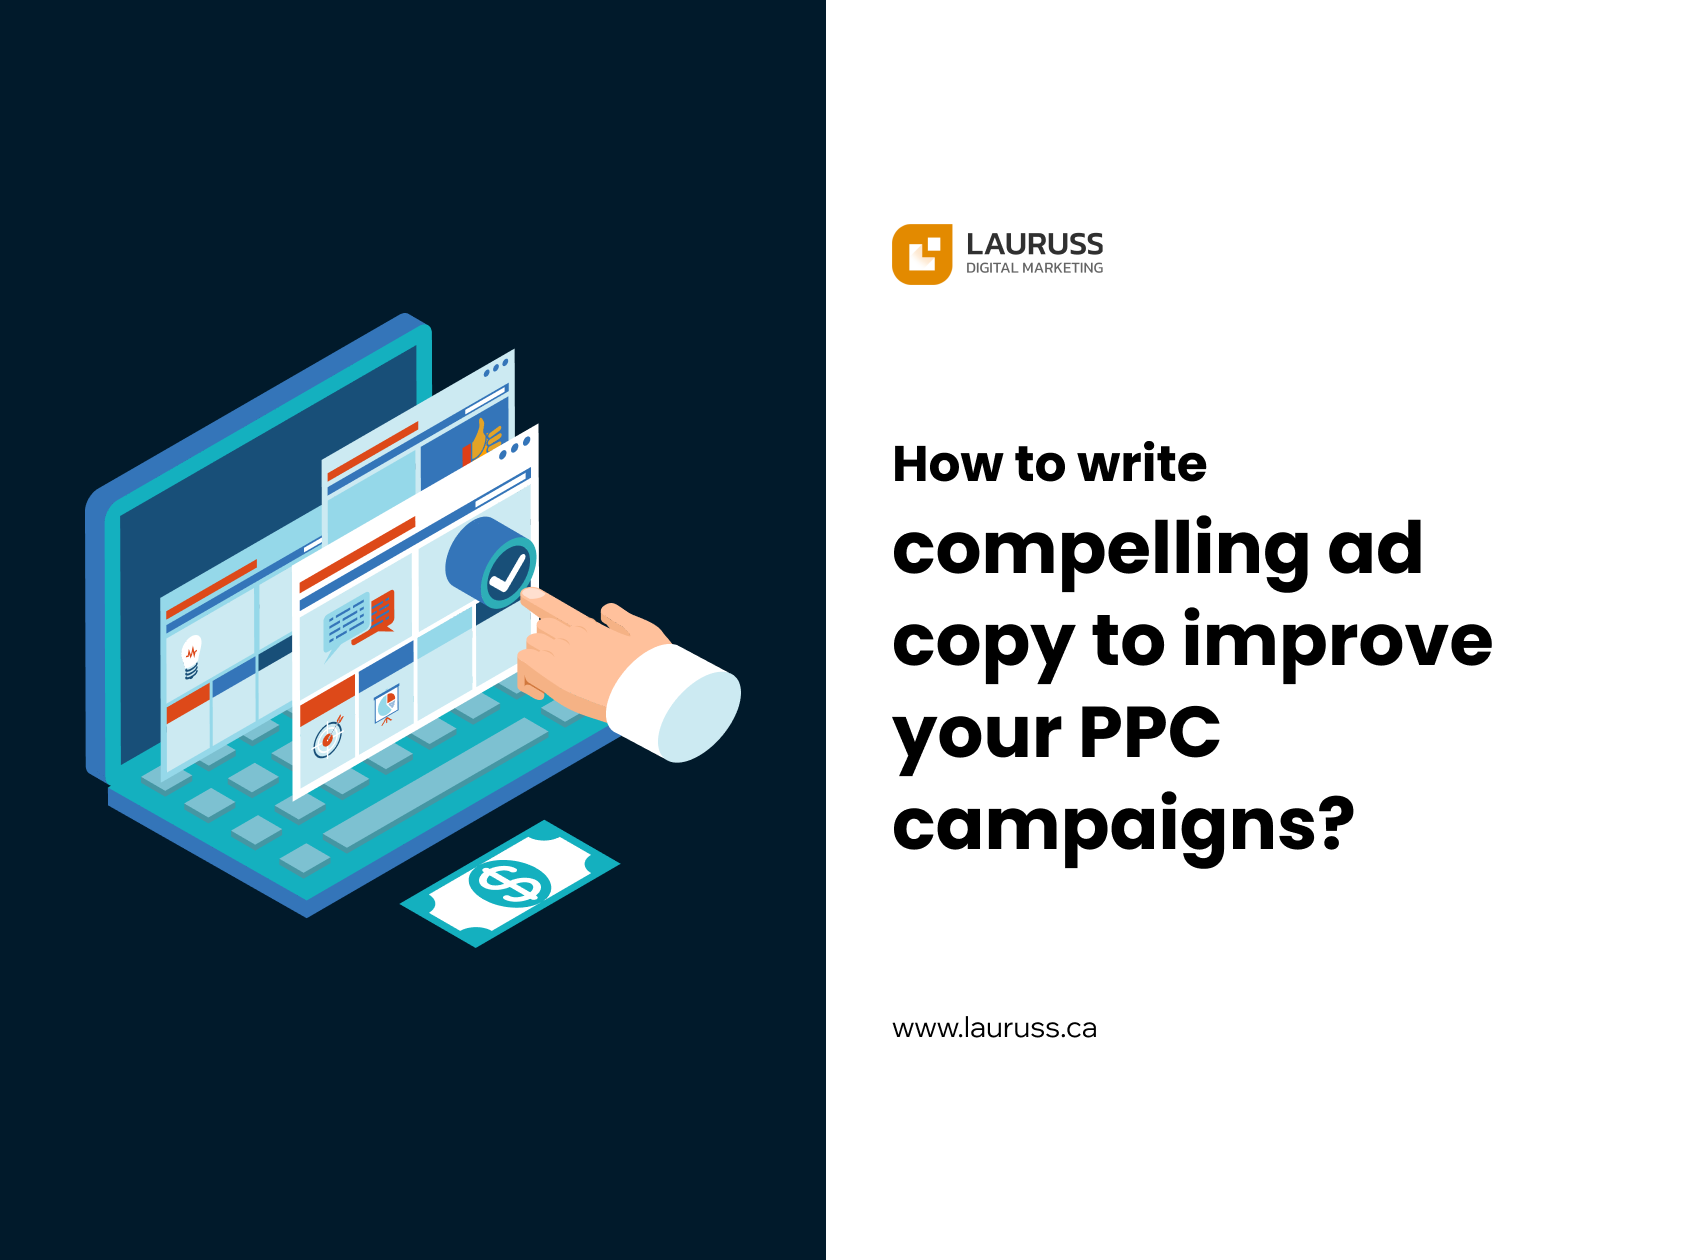 How to write compelling ad copy to improve ppc campaign